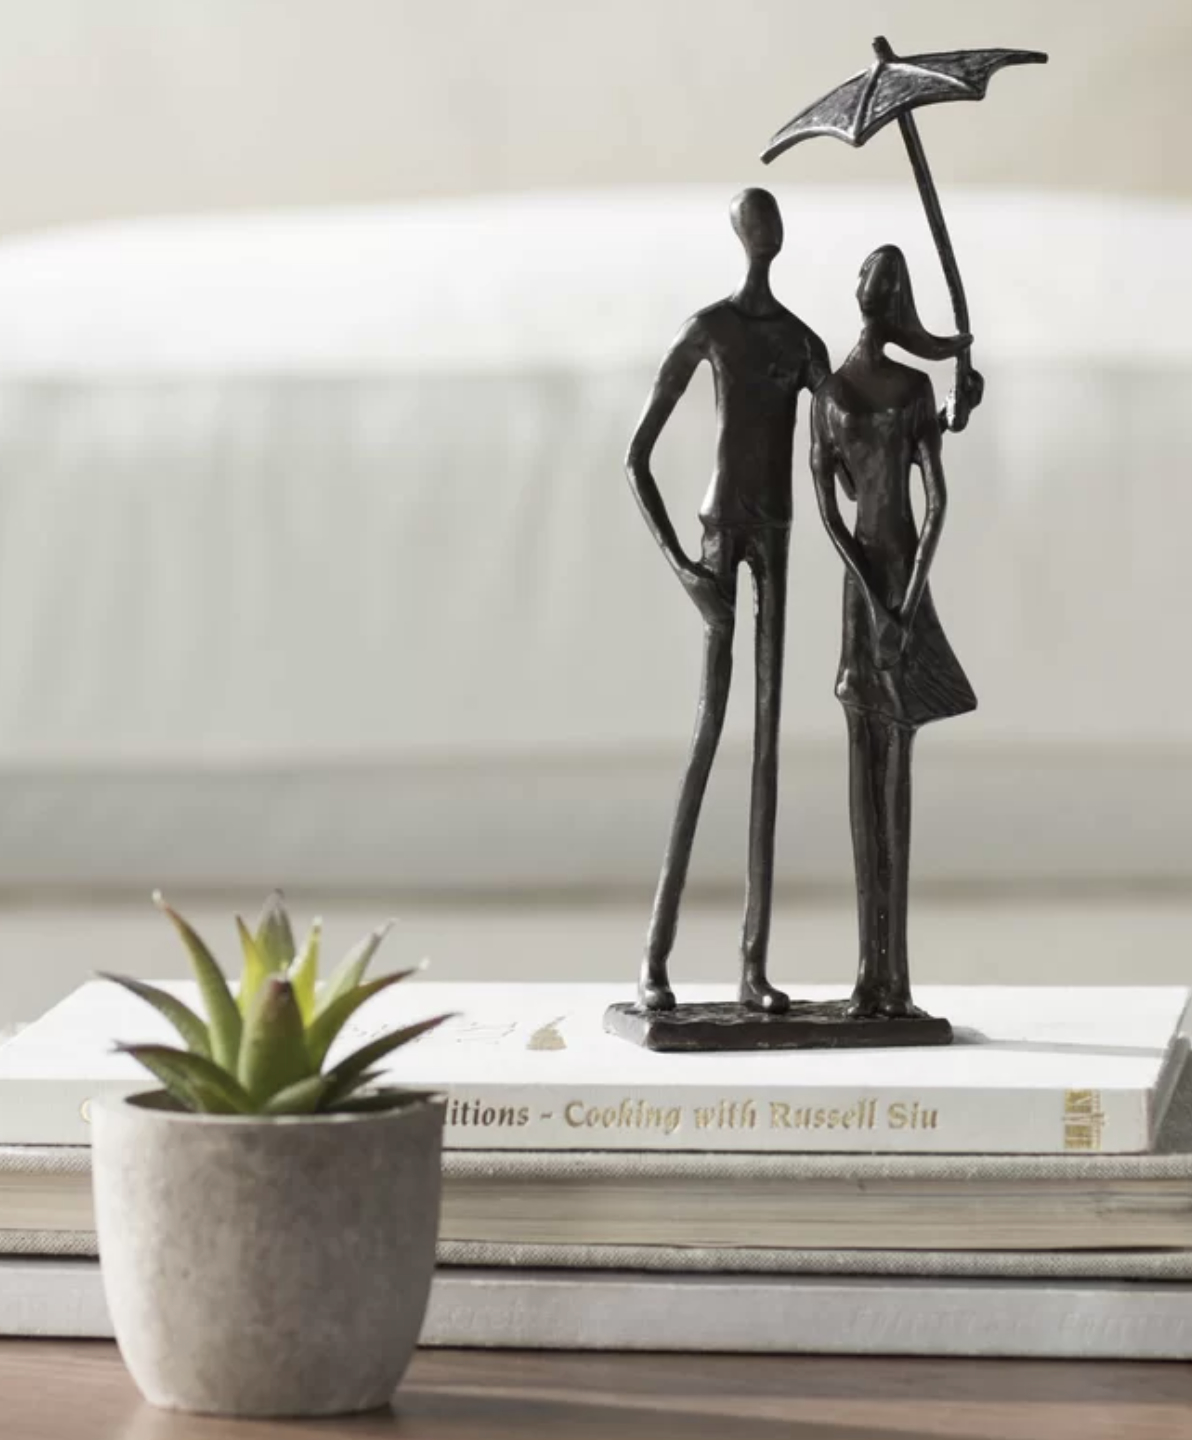 Sculpture of two abstract human figures, one holding an umbrella, on a book next to a potted plant